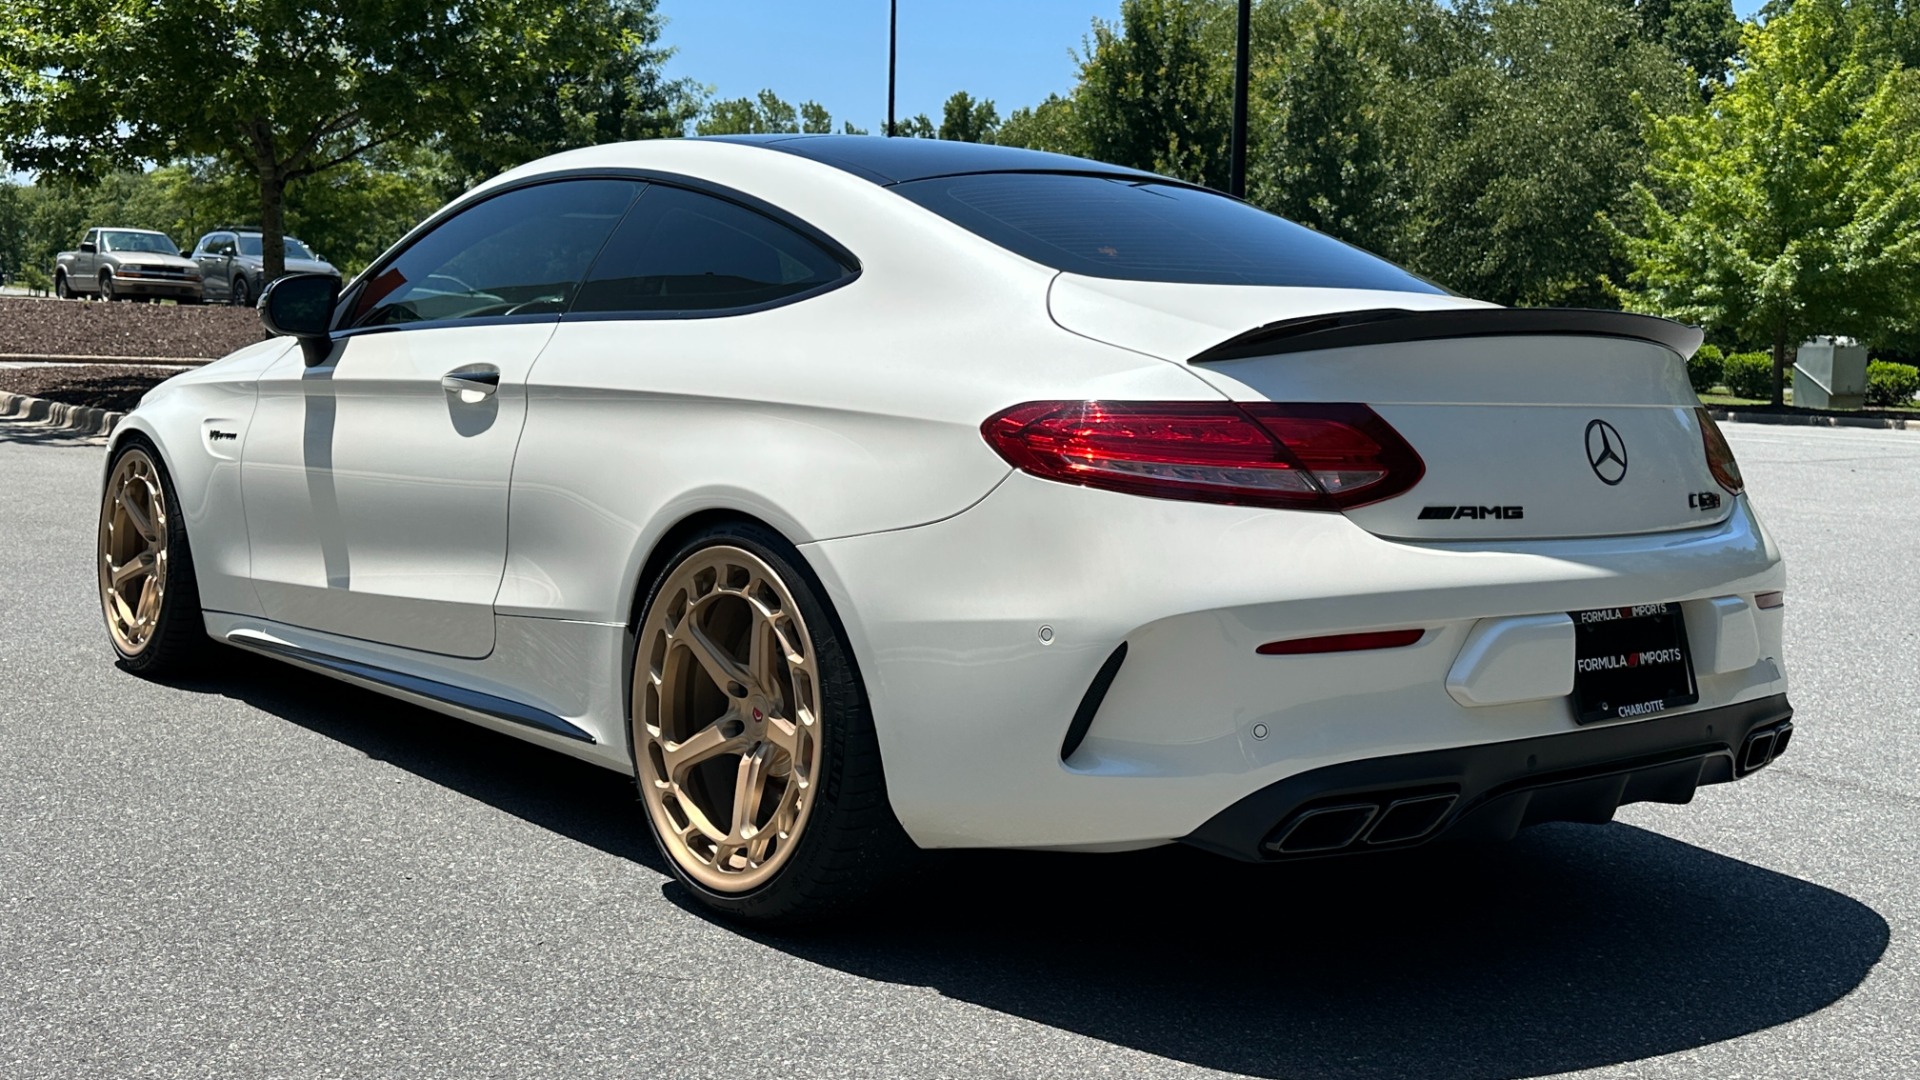 Used 2018 Mercedes-Benz C-Class AMG C 63 S / FORGED WHEELS VOSSEN LC / RENNTECH LOWERING SPRINGS / DINAN AM for sale $58,499 at Formula Imports in Charlotte NC 28227 4